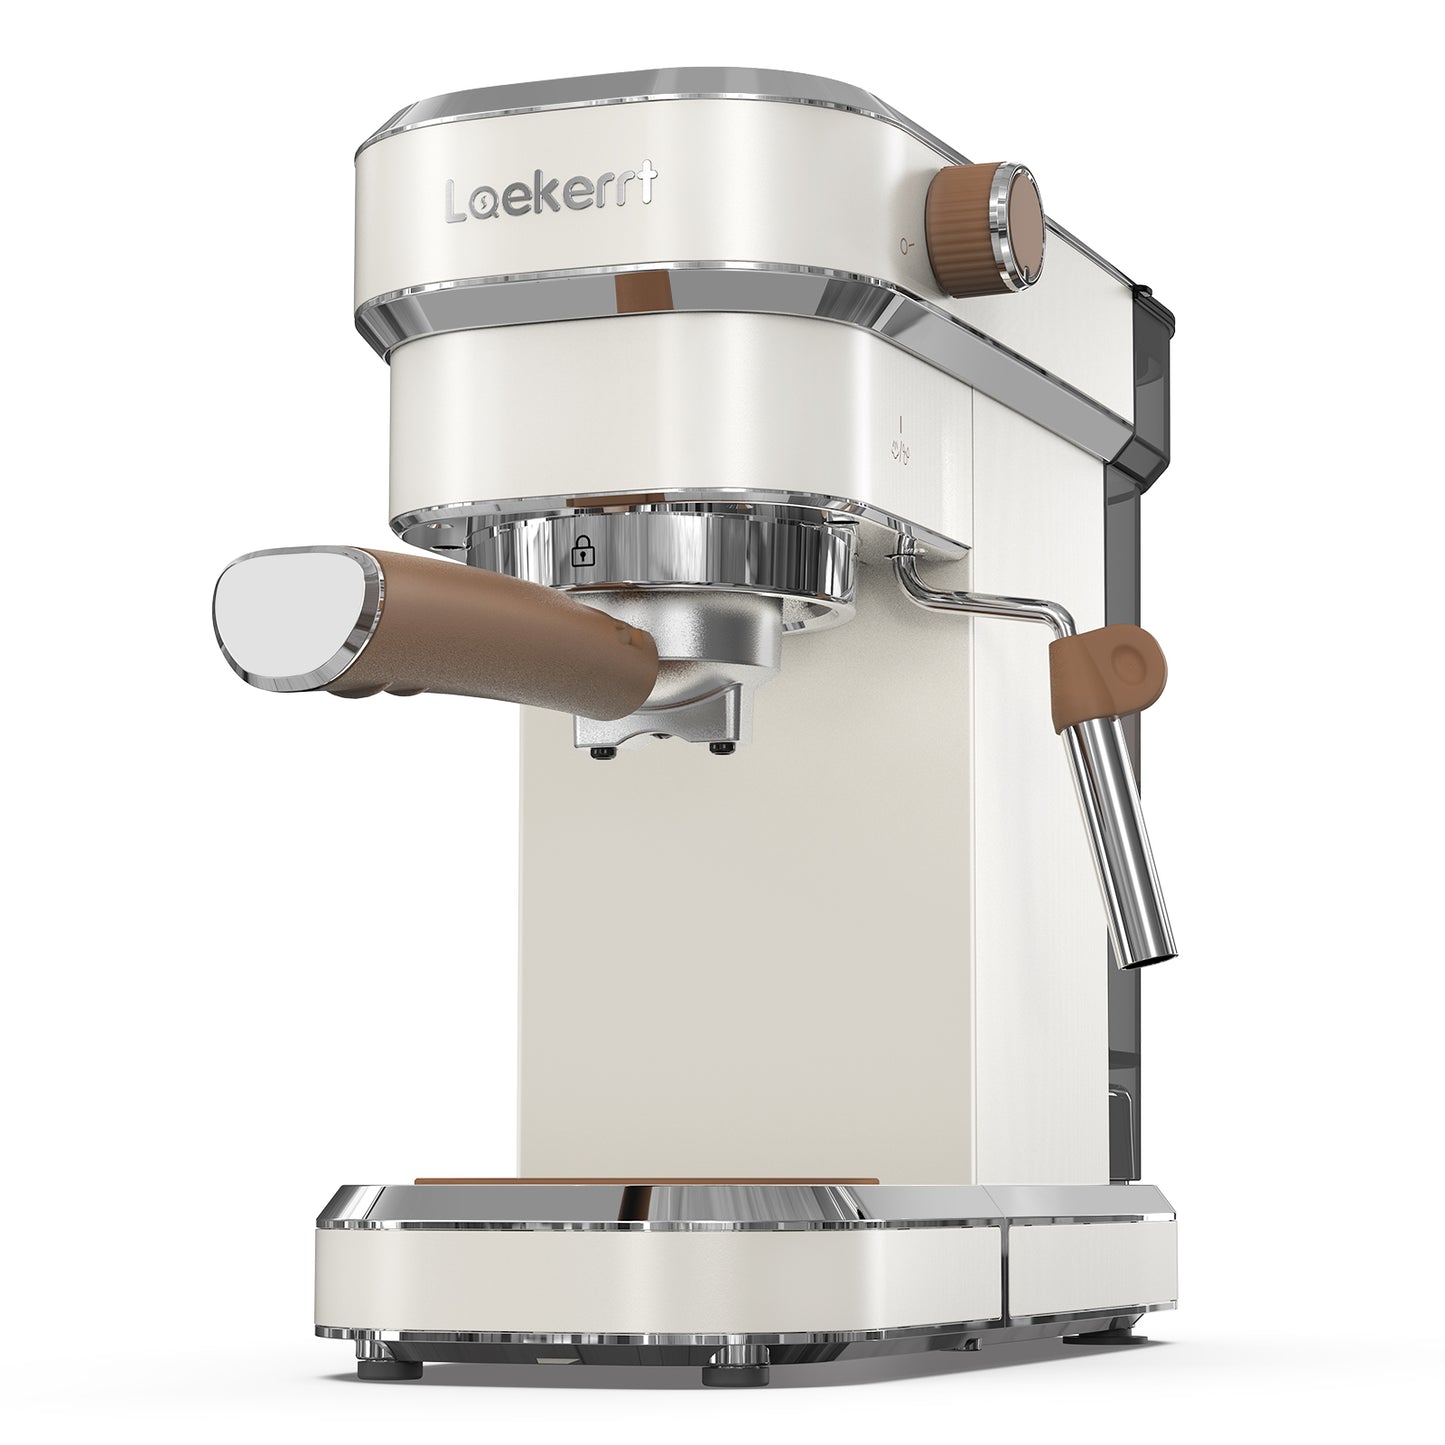 [Used - Very Good] Laekerrt Espresso Machine with Milk Frother Steamer, Home Expresso Coffee Machine for Cappuccino and Latte, Various colors and models, normal function, with use or test traces